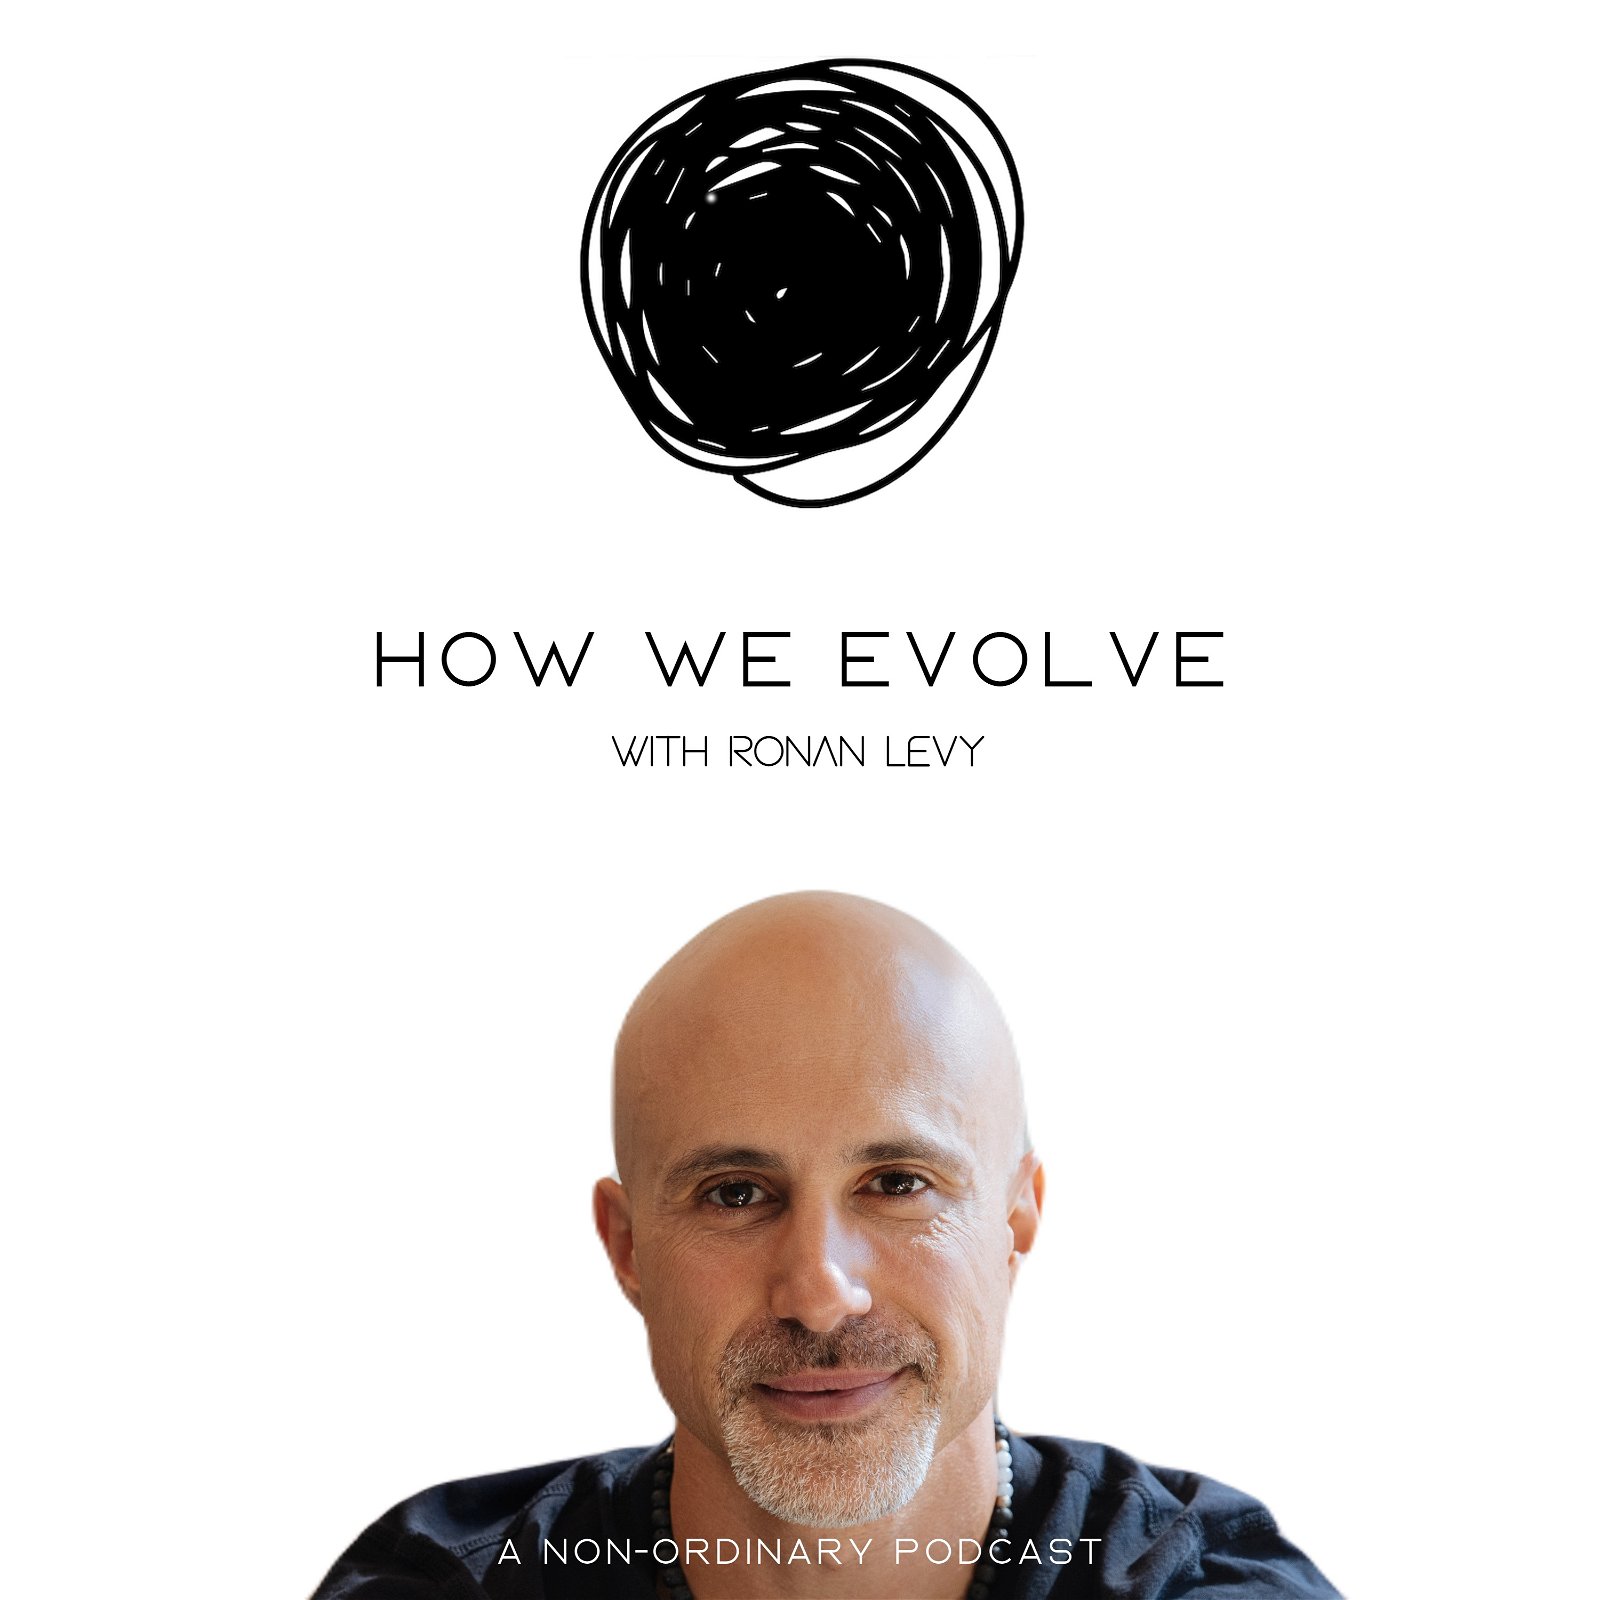 How We Evolve: A Non-Ordinary Podcast